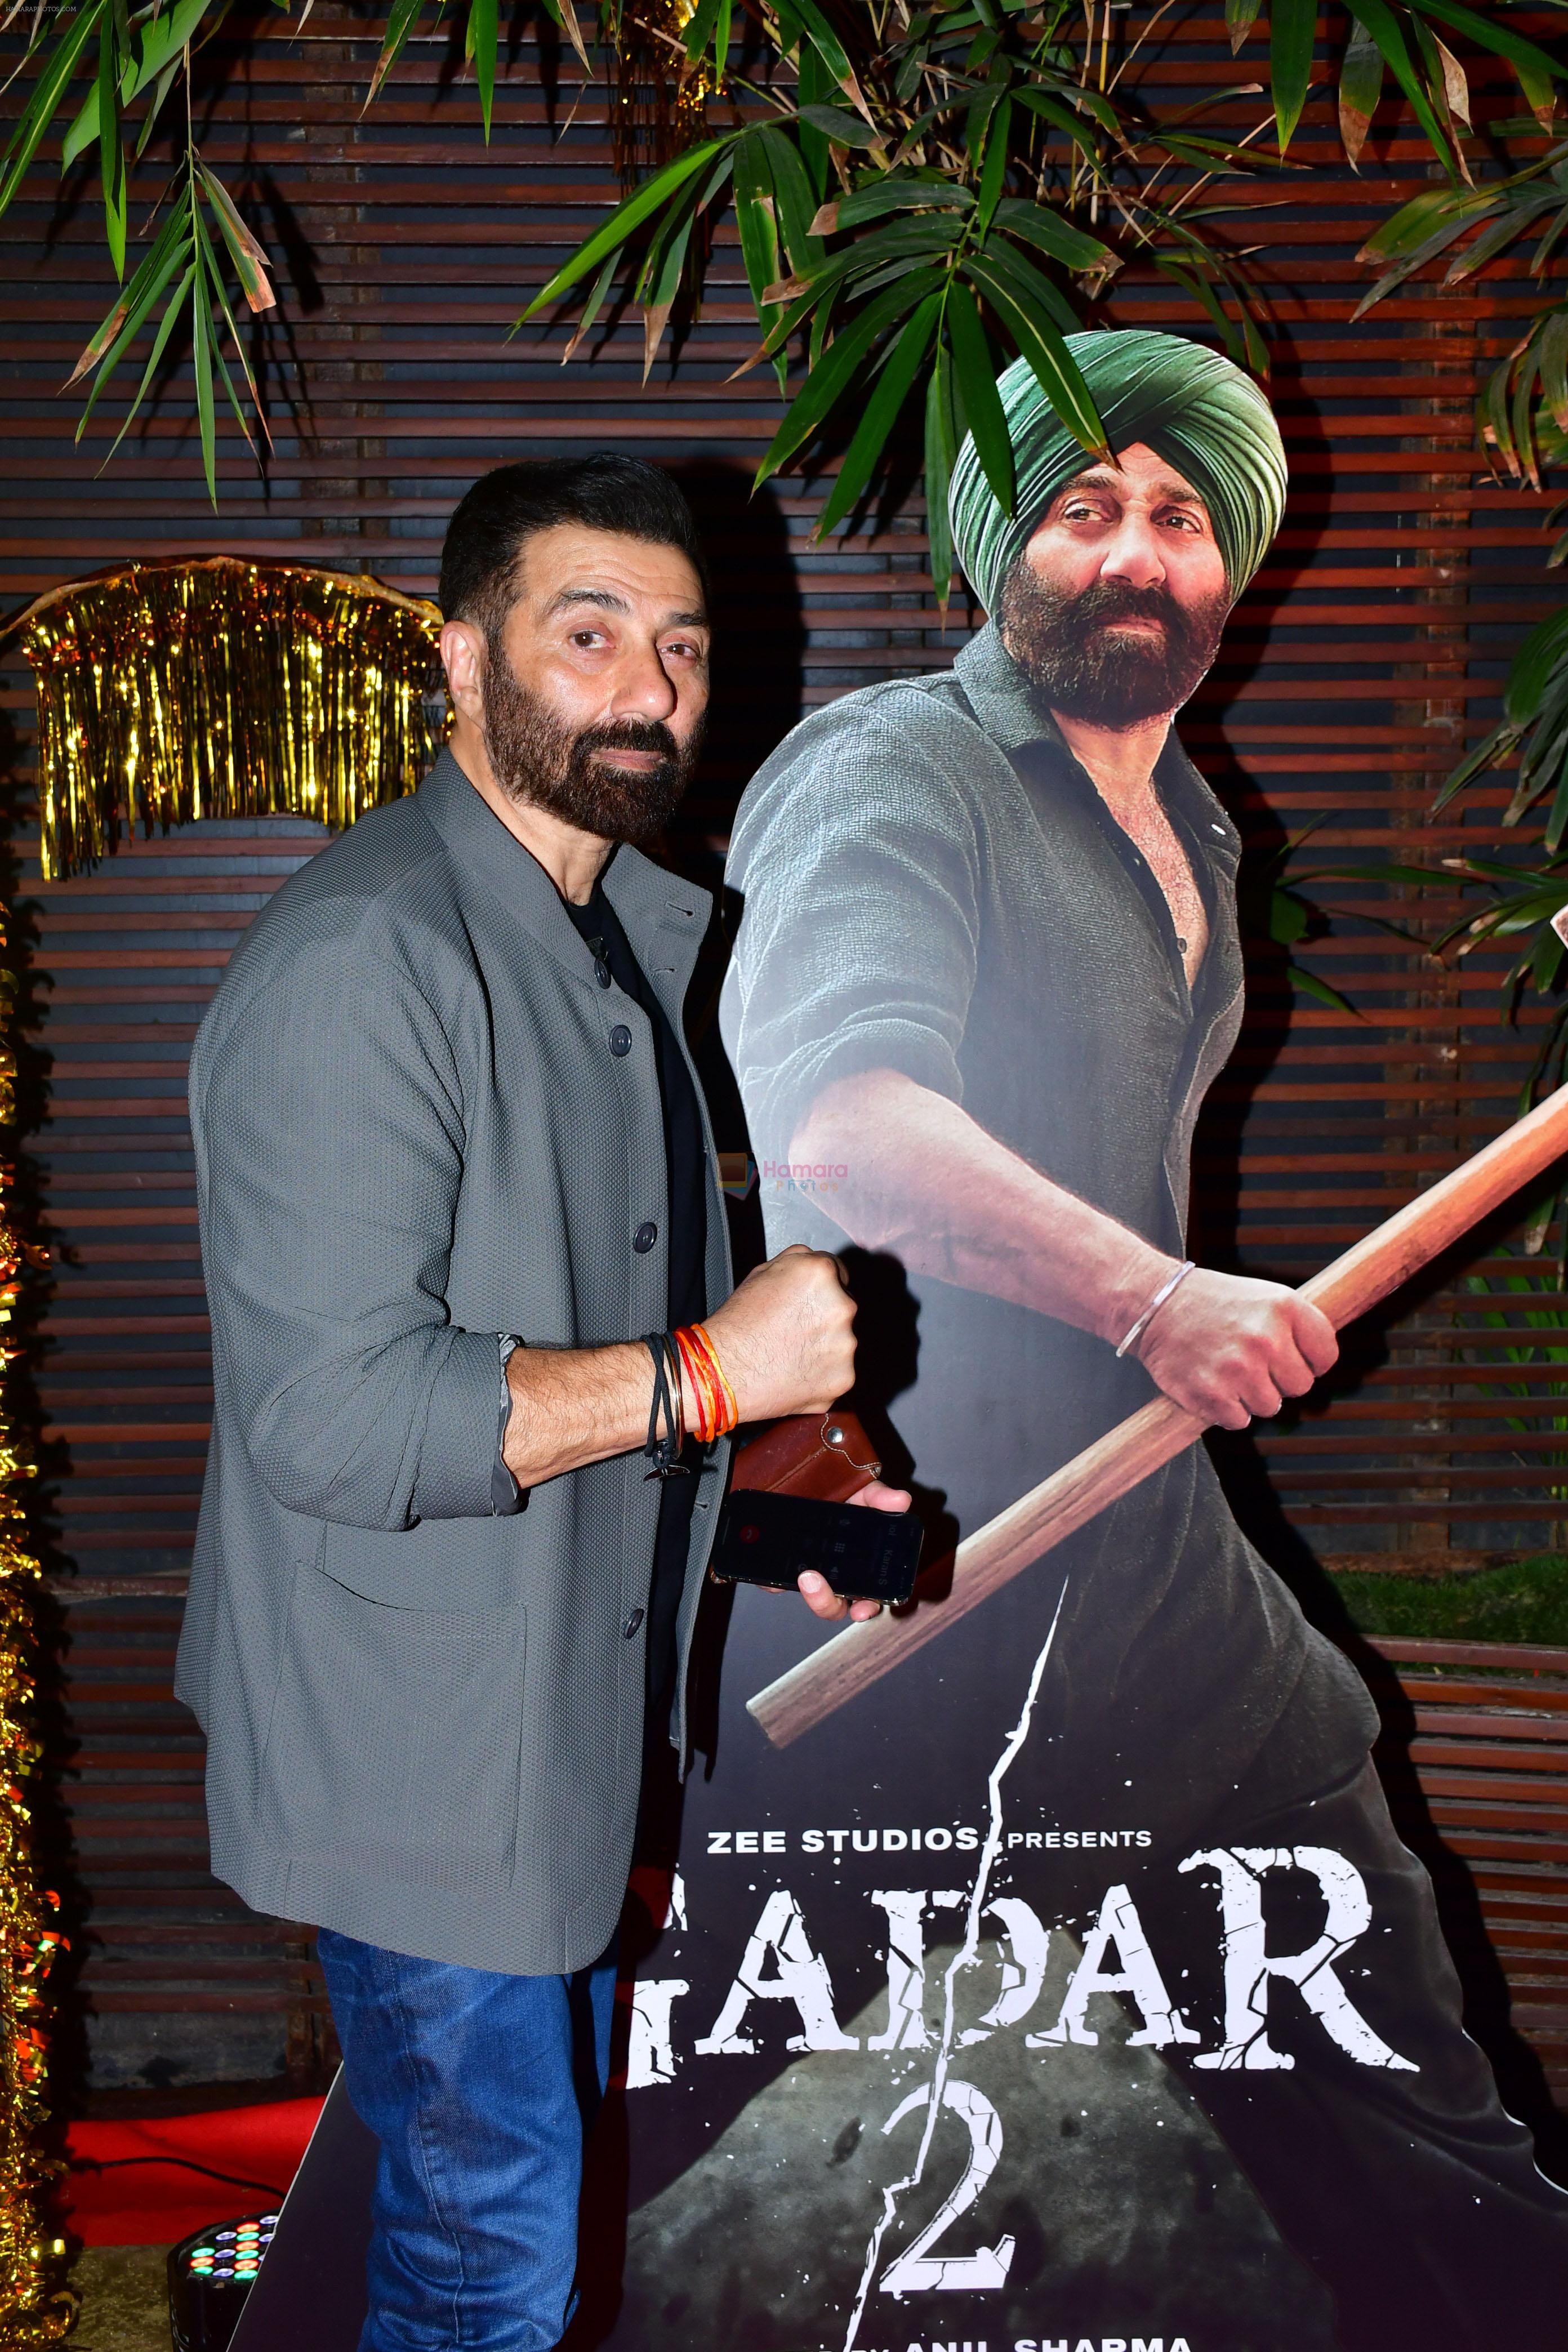 Sunny Deol at Gadar 2 Success Party on 25th August 2023